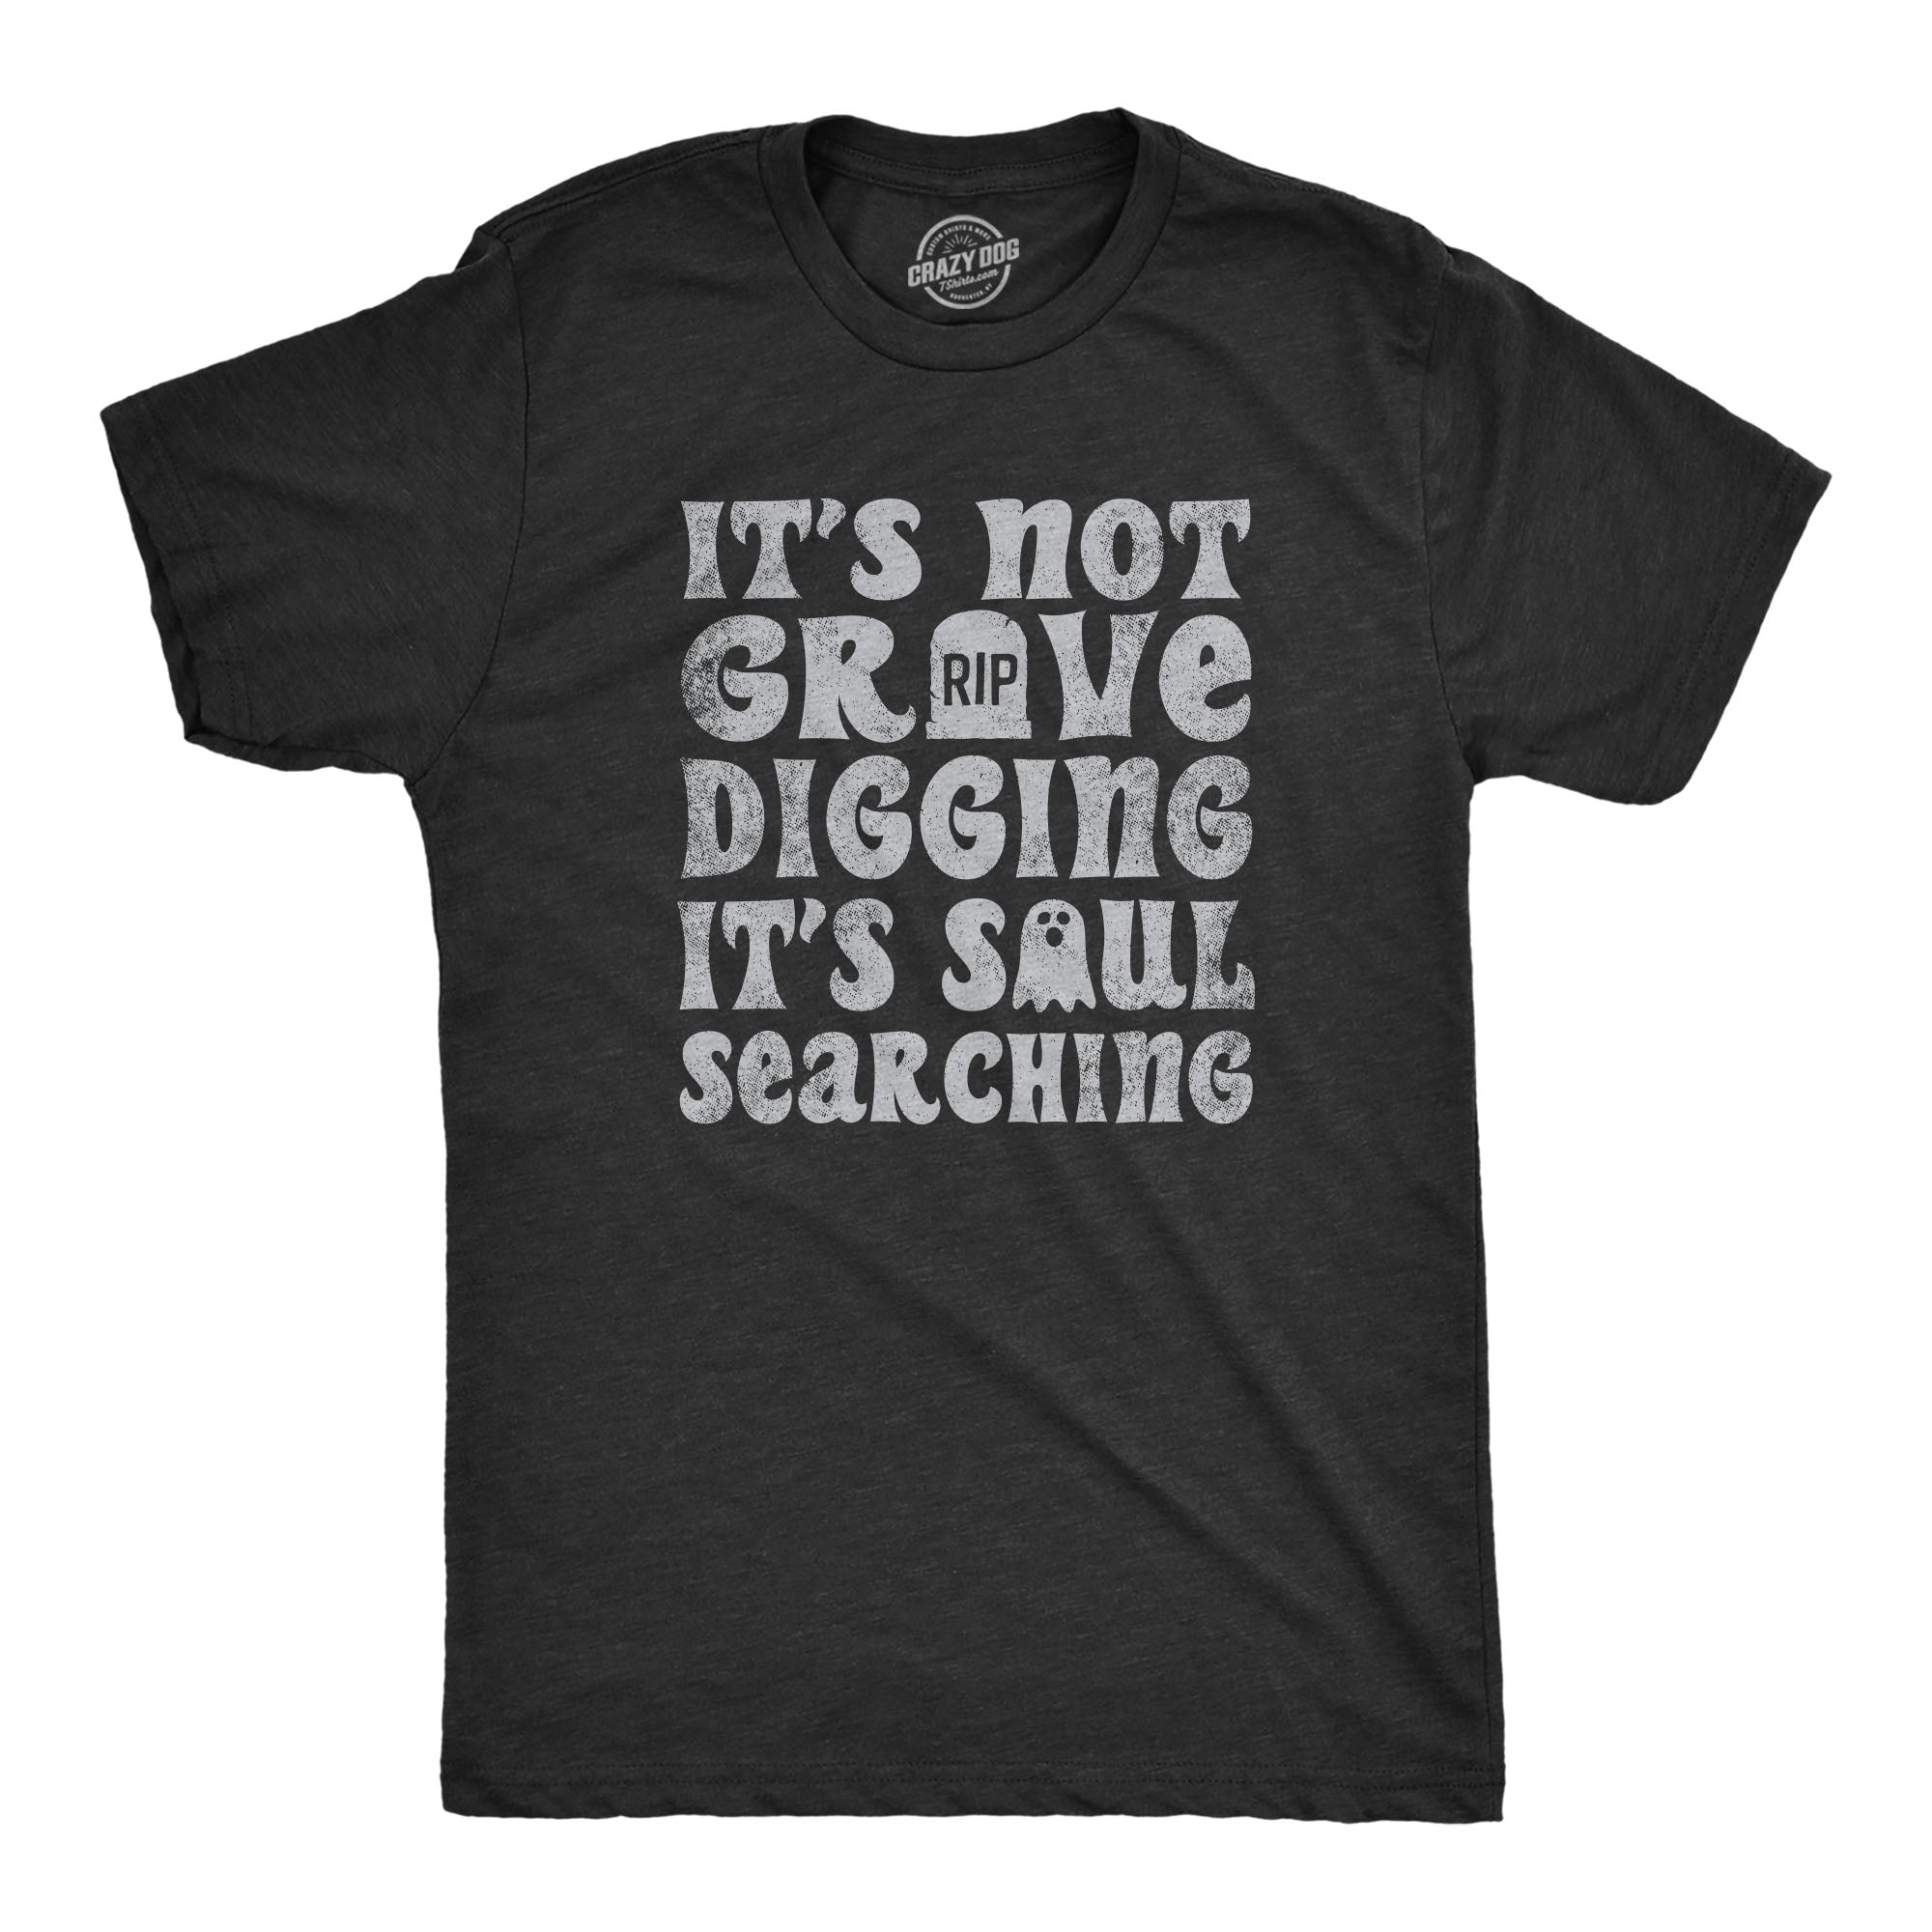 Funny Heather Black - GRAVE Its Not Grave Digging Its Soul Searching Mens T Shirt Nerdy Halloween Sarcastic Tee